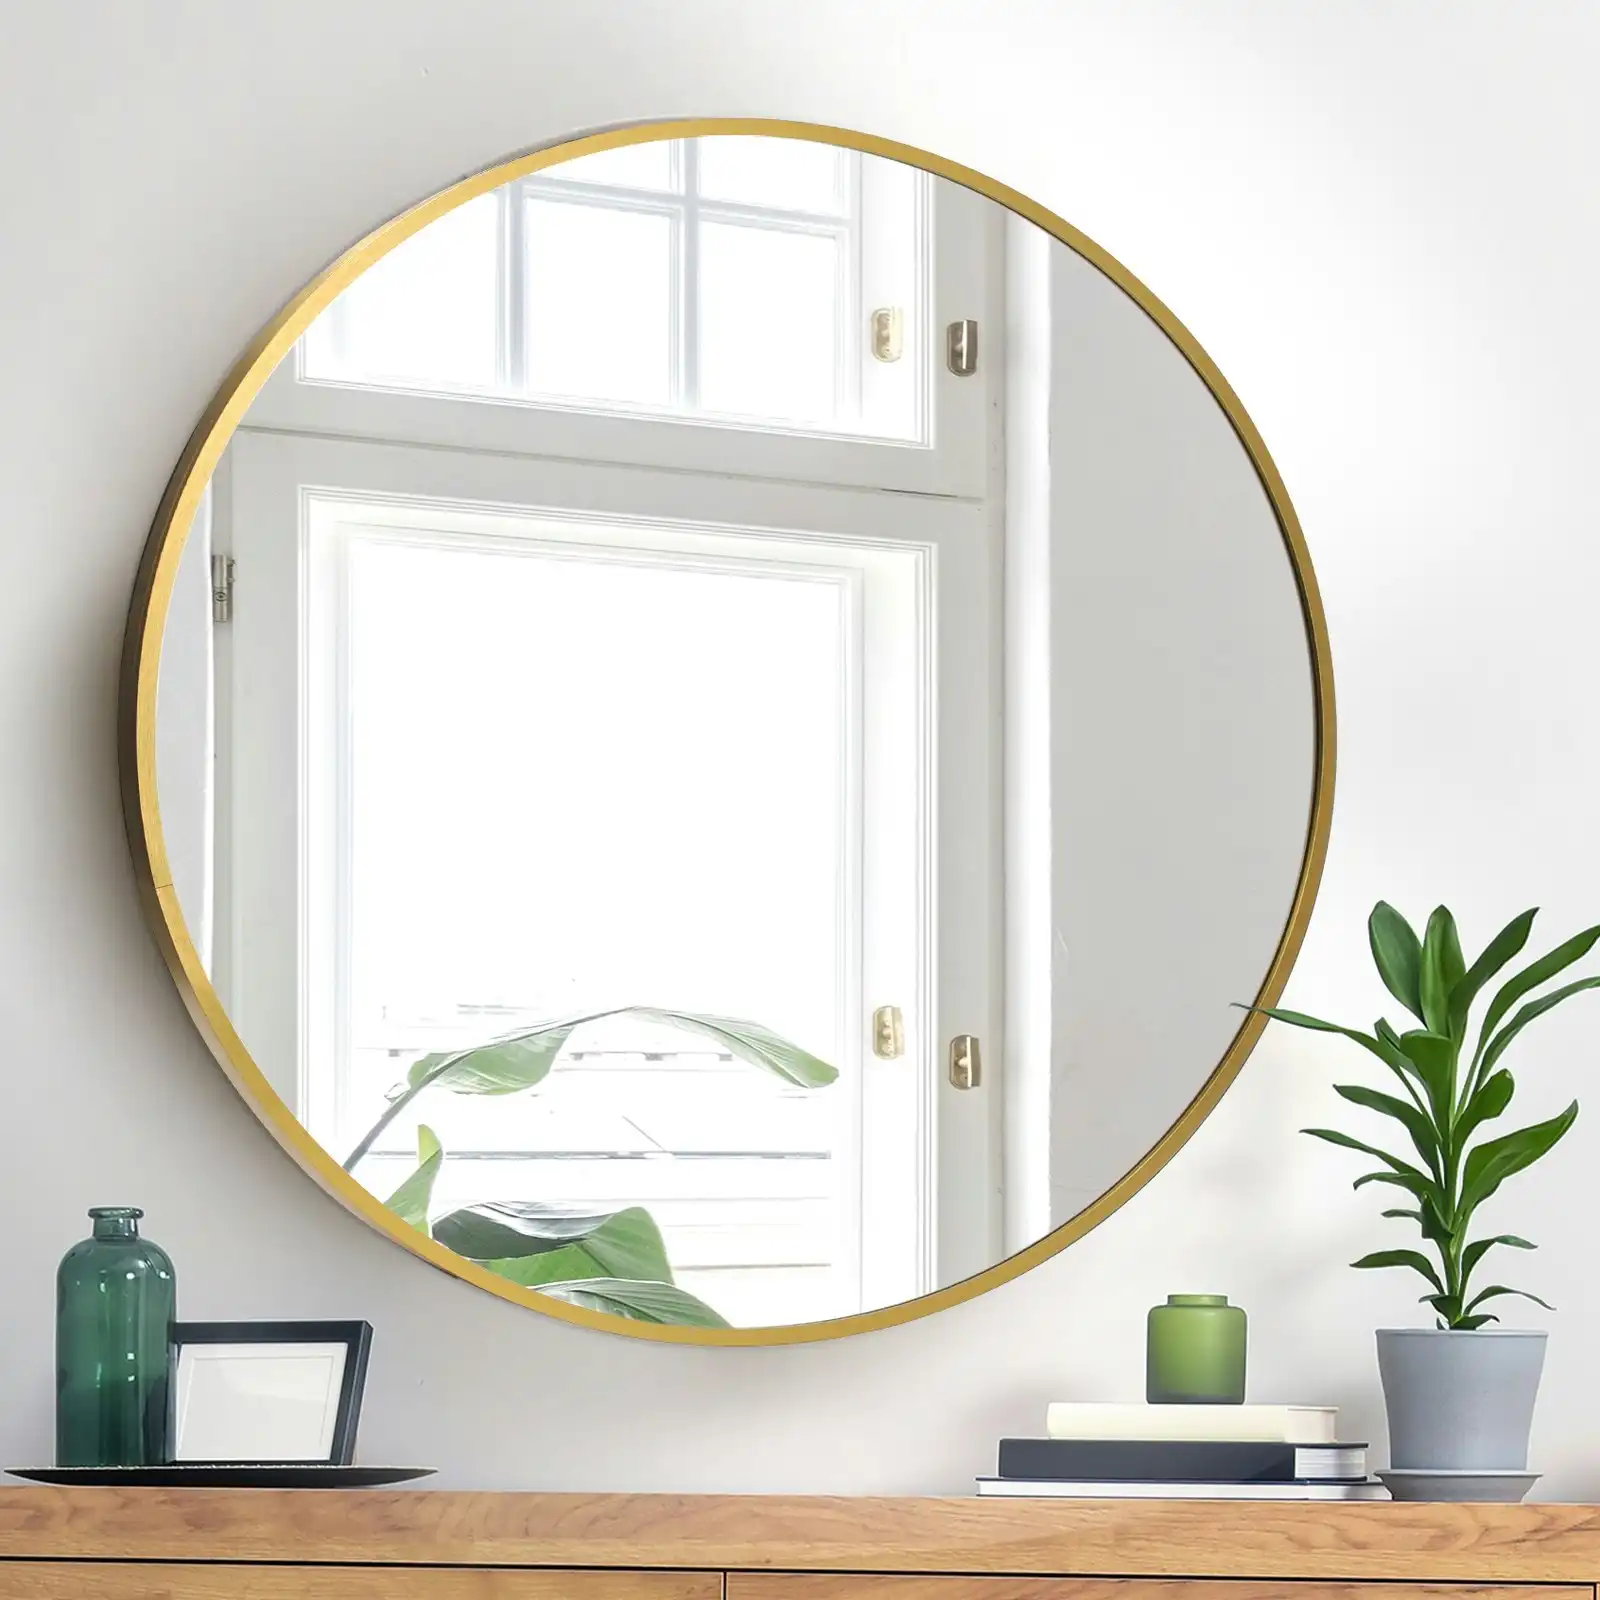 Oikiture Wall Mirrors Round Makeup Mirror Vanity Home Decorative Gold 80cm